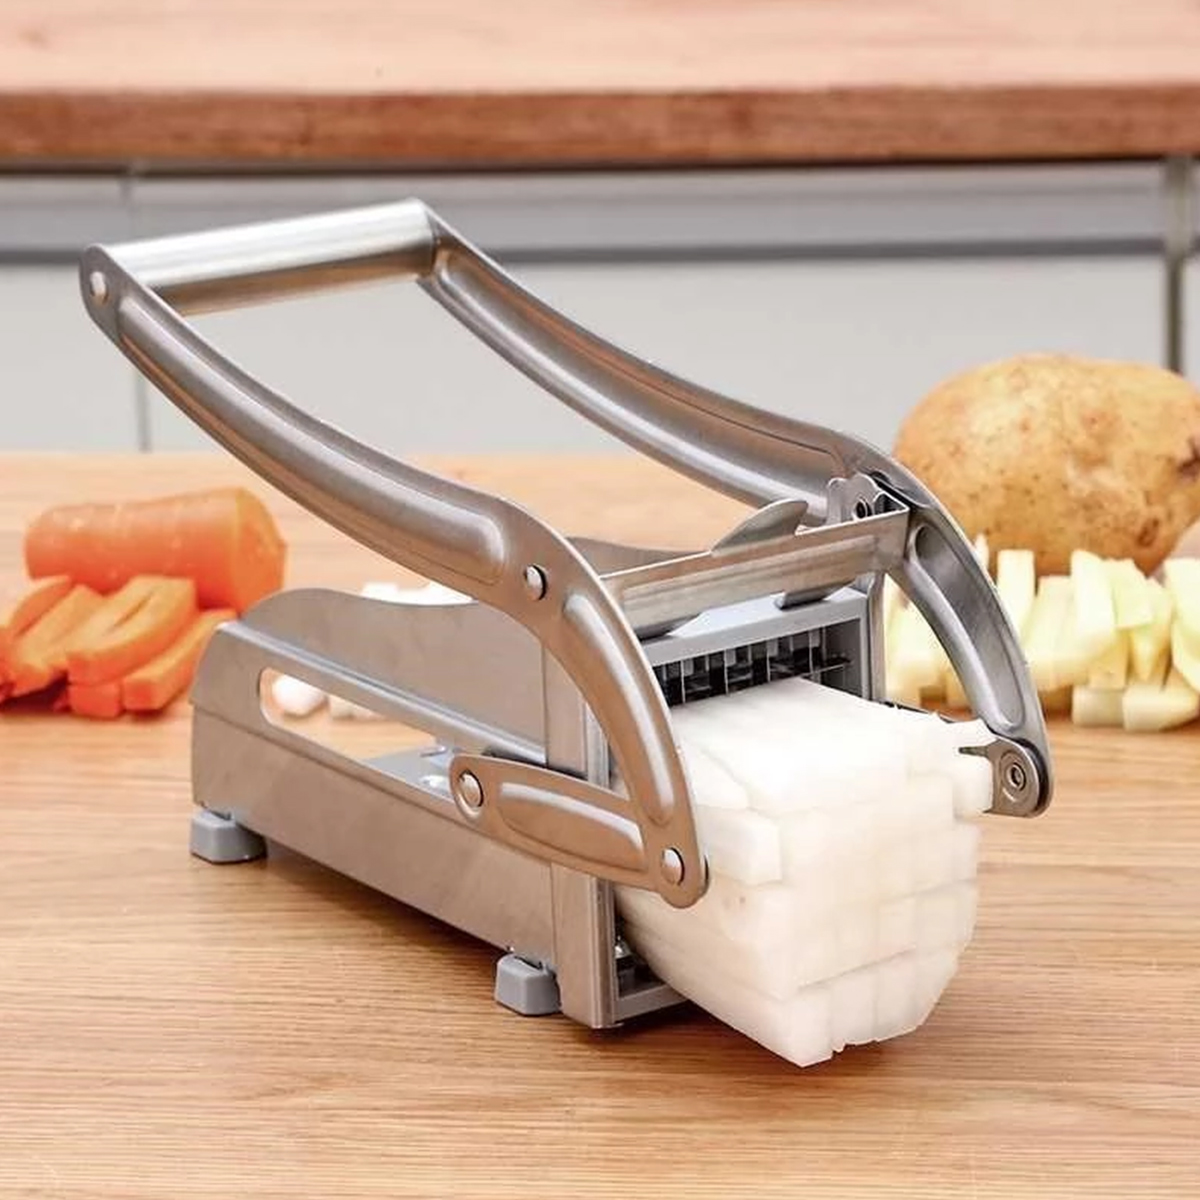 MTFun French Fry Cutter Multifunction Potato Slicer Vegetable Fruit Chopper  with Stainless Steel Blades for French Fries Chips Maker Potato Slicer  for Tomato Potato Cooking Gadget Tool